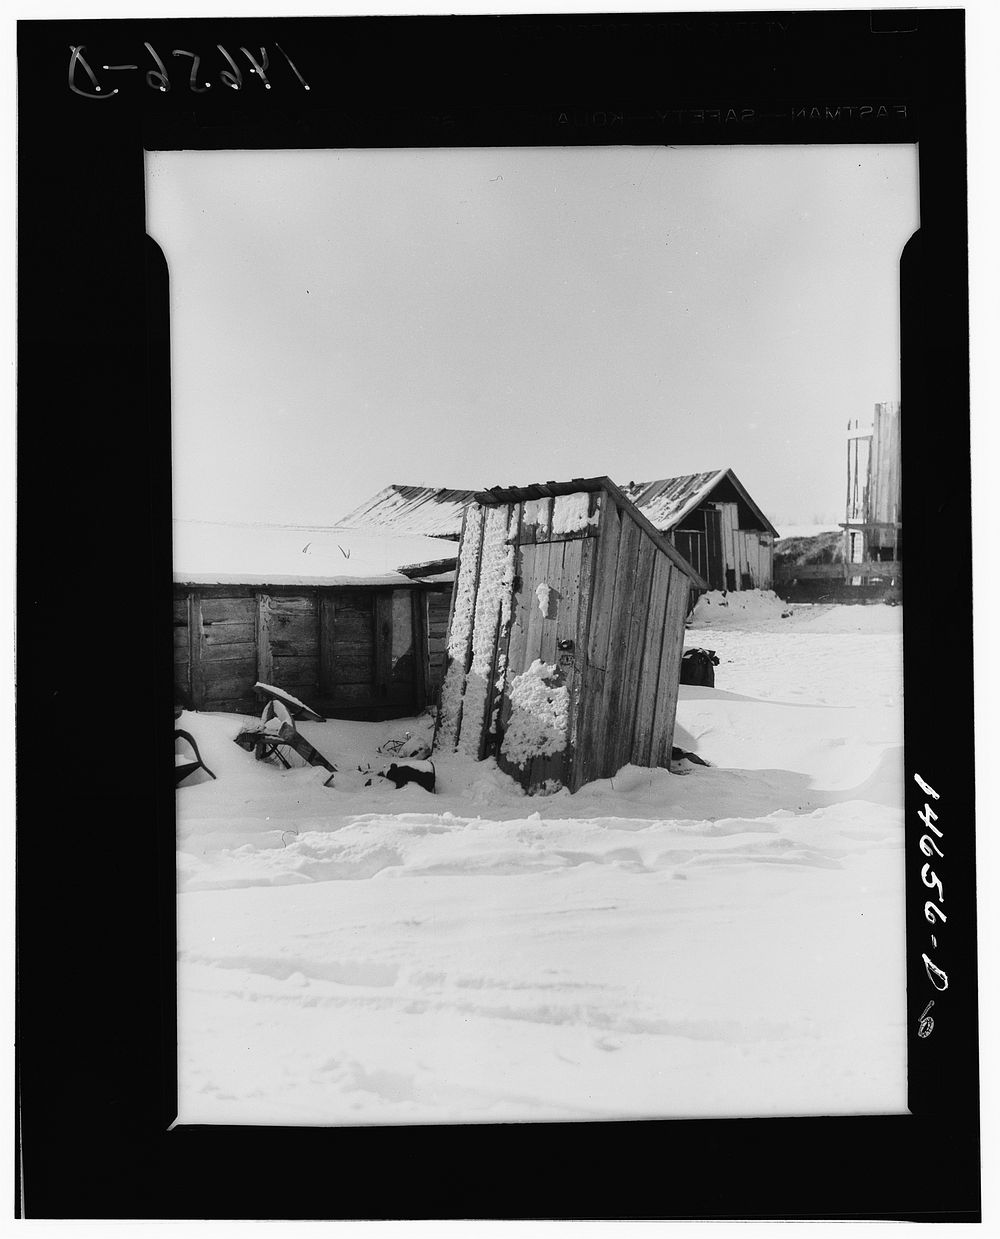 Unsanitary surface privy. Minnesota. Sourced from the Library of Congress.